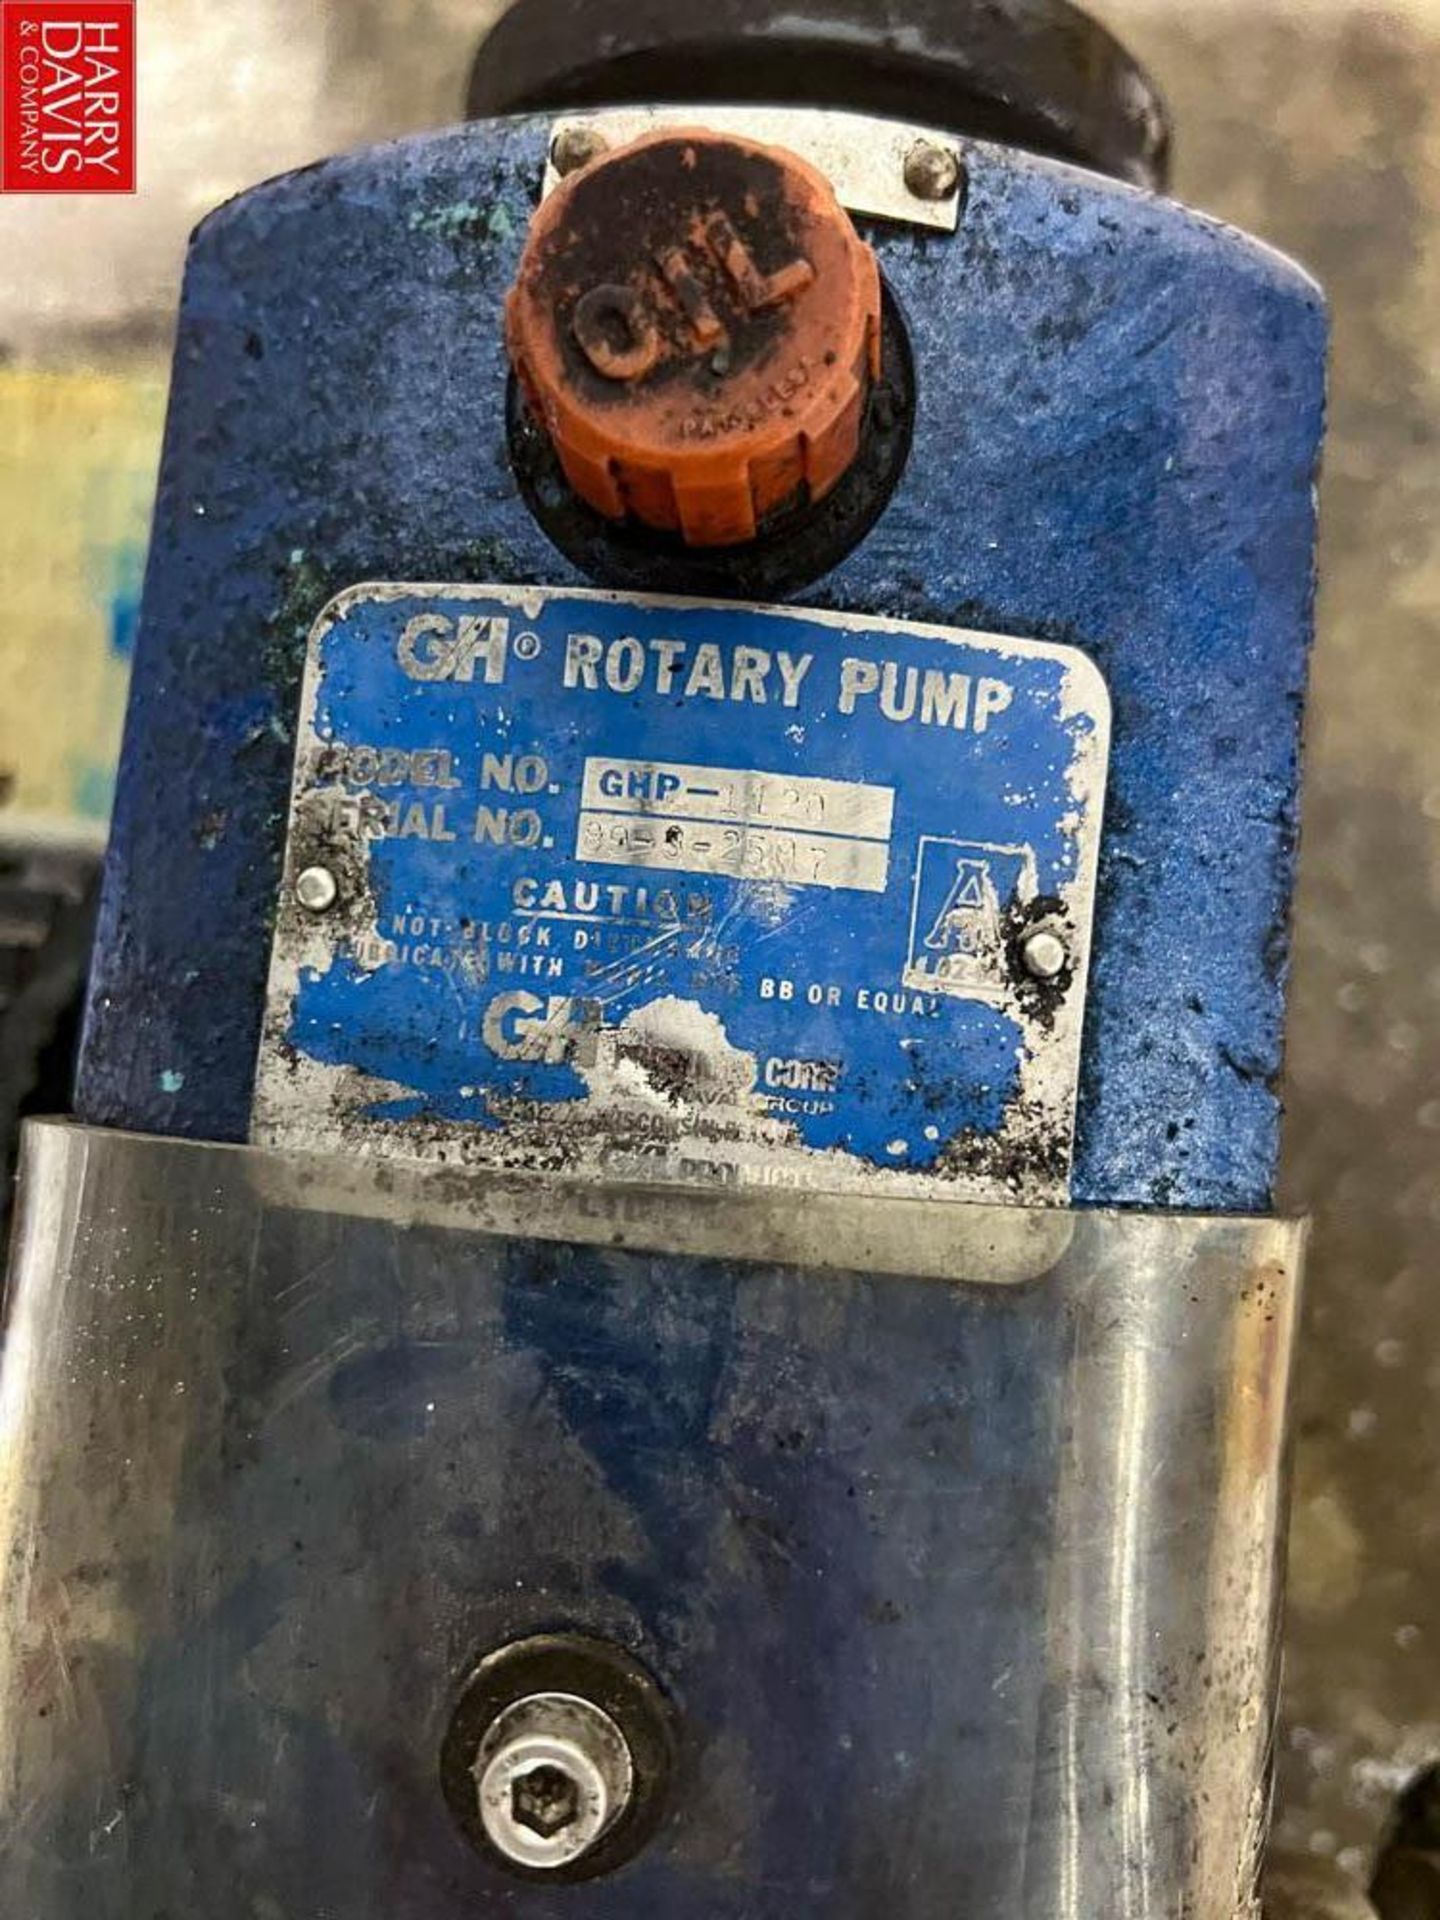 Rotary Pump - Rigging Fee: $75 - Image 2 of 2